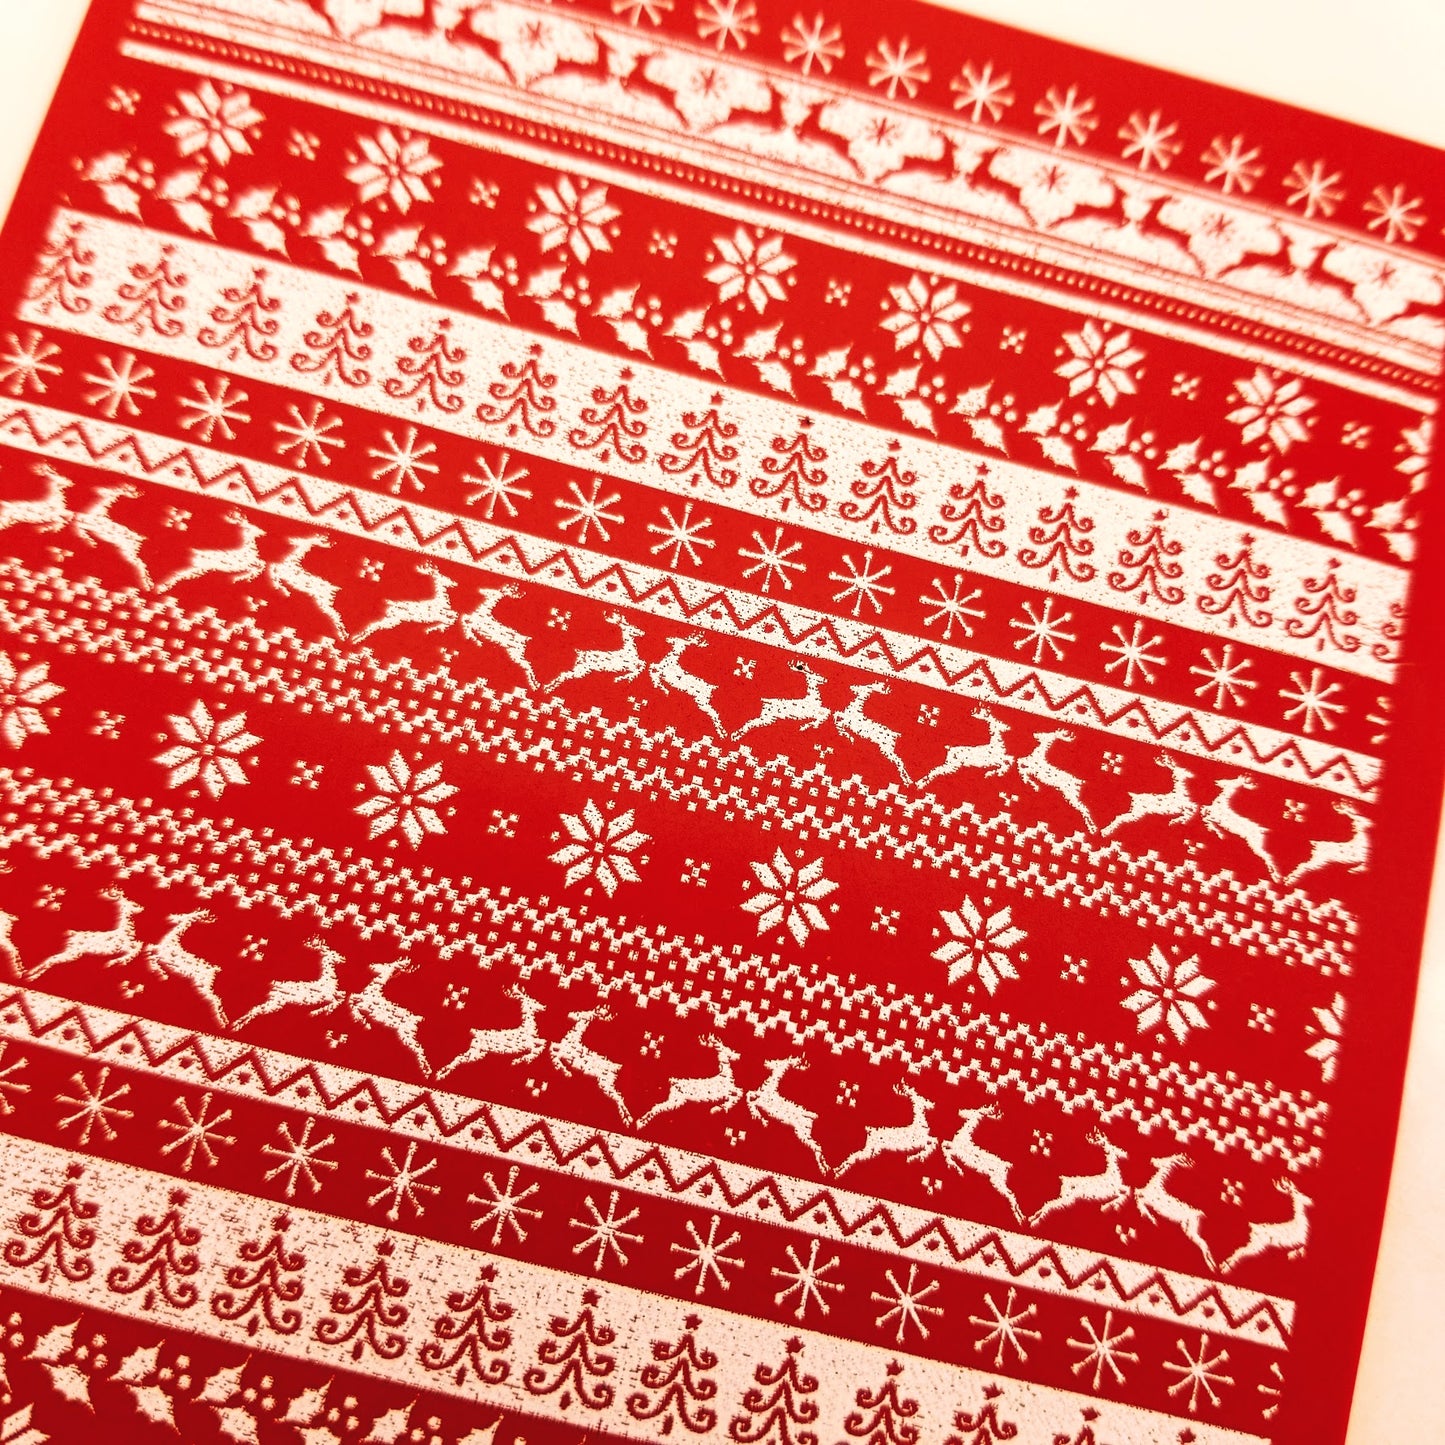 Christmas Knits Details Pattern Silkscreen Clay Painting on Polymer Clay